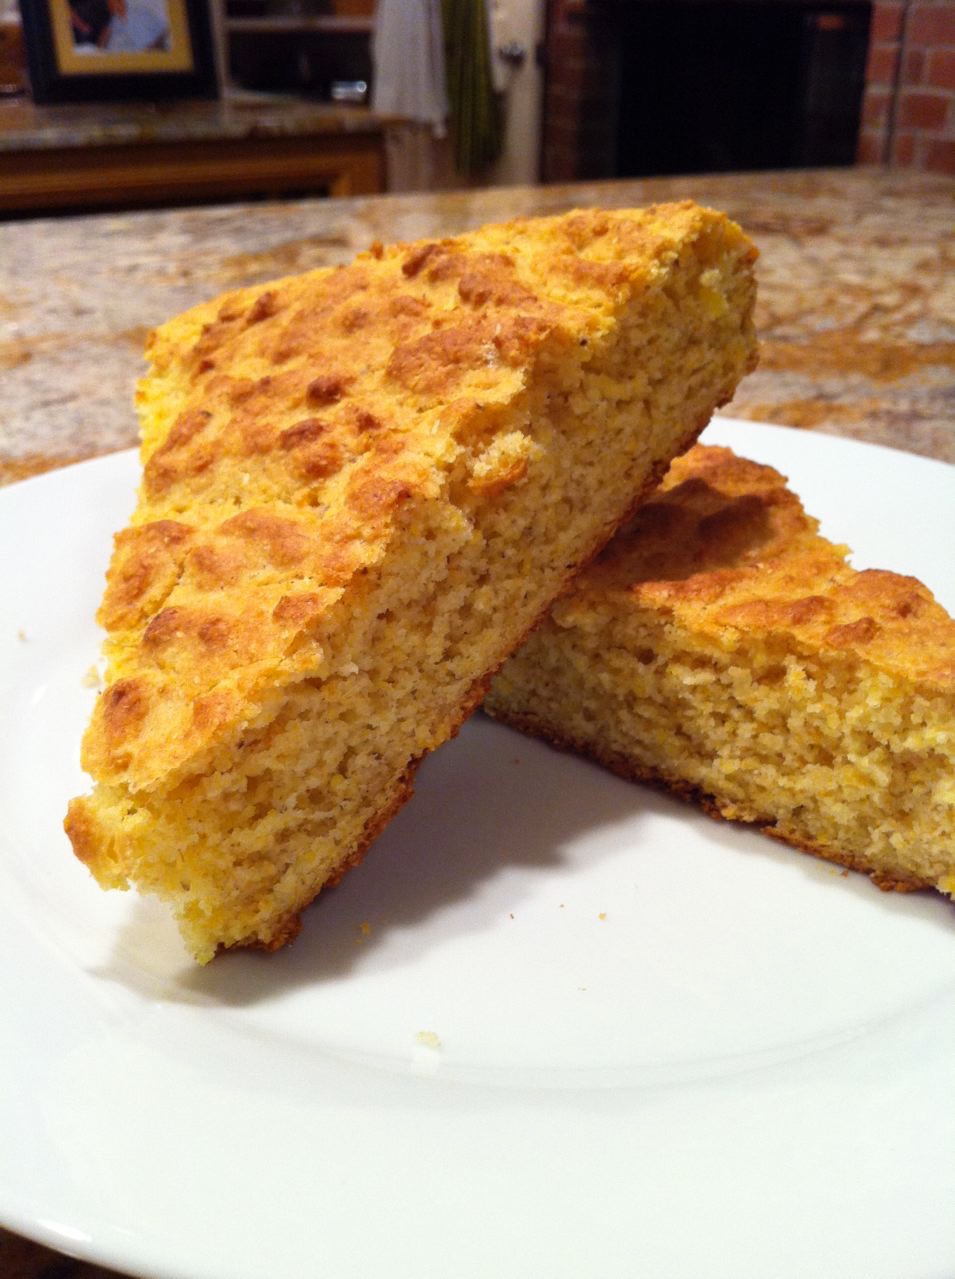 Cornbread dressing starts with this Texas Mexican version of cornbread